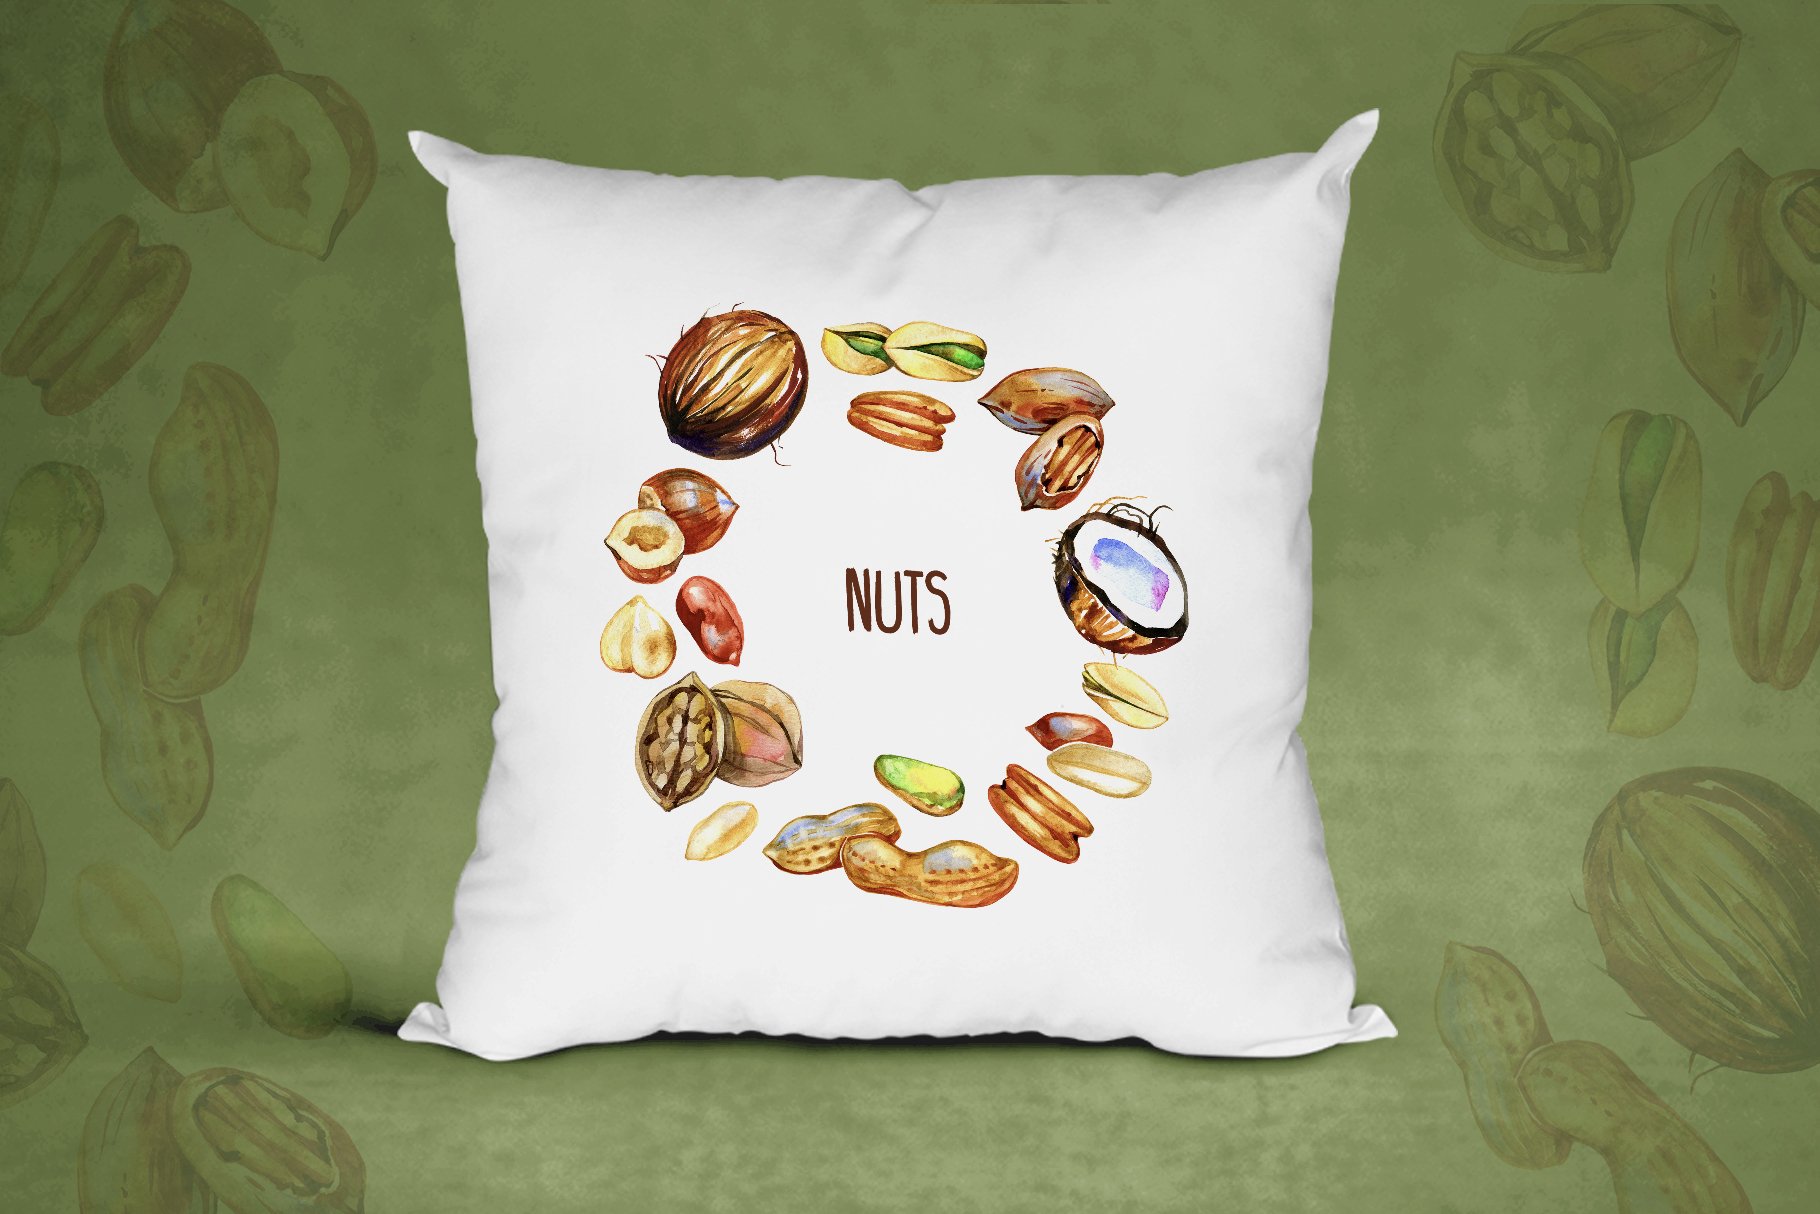 White decorate pillow with the nuts round.